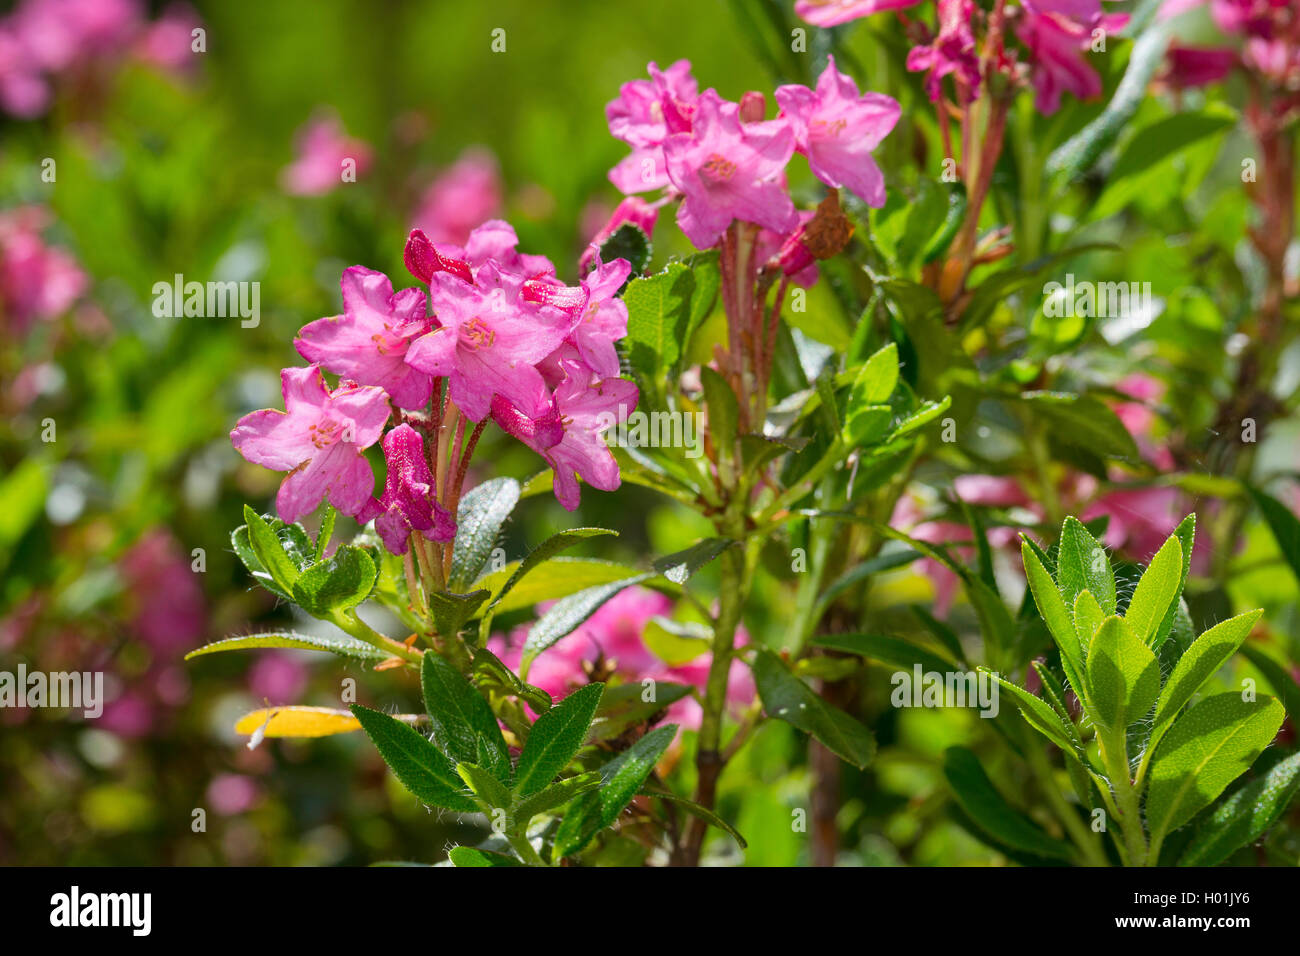 Alpine Rose High Resolution Stock Photography and Images - Alamy